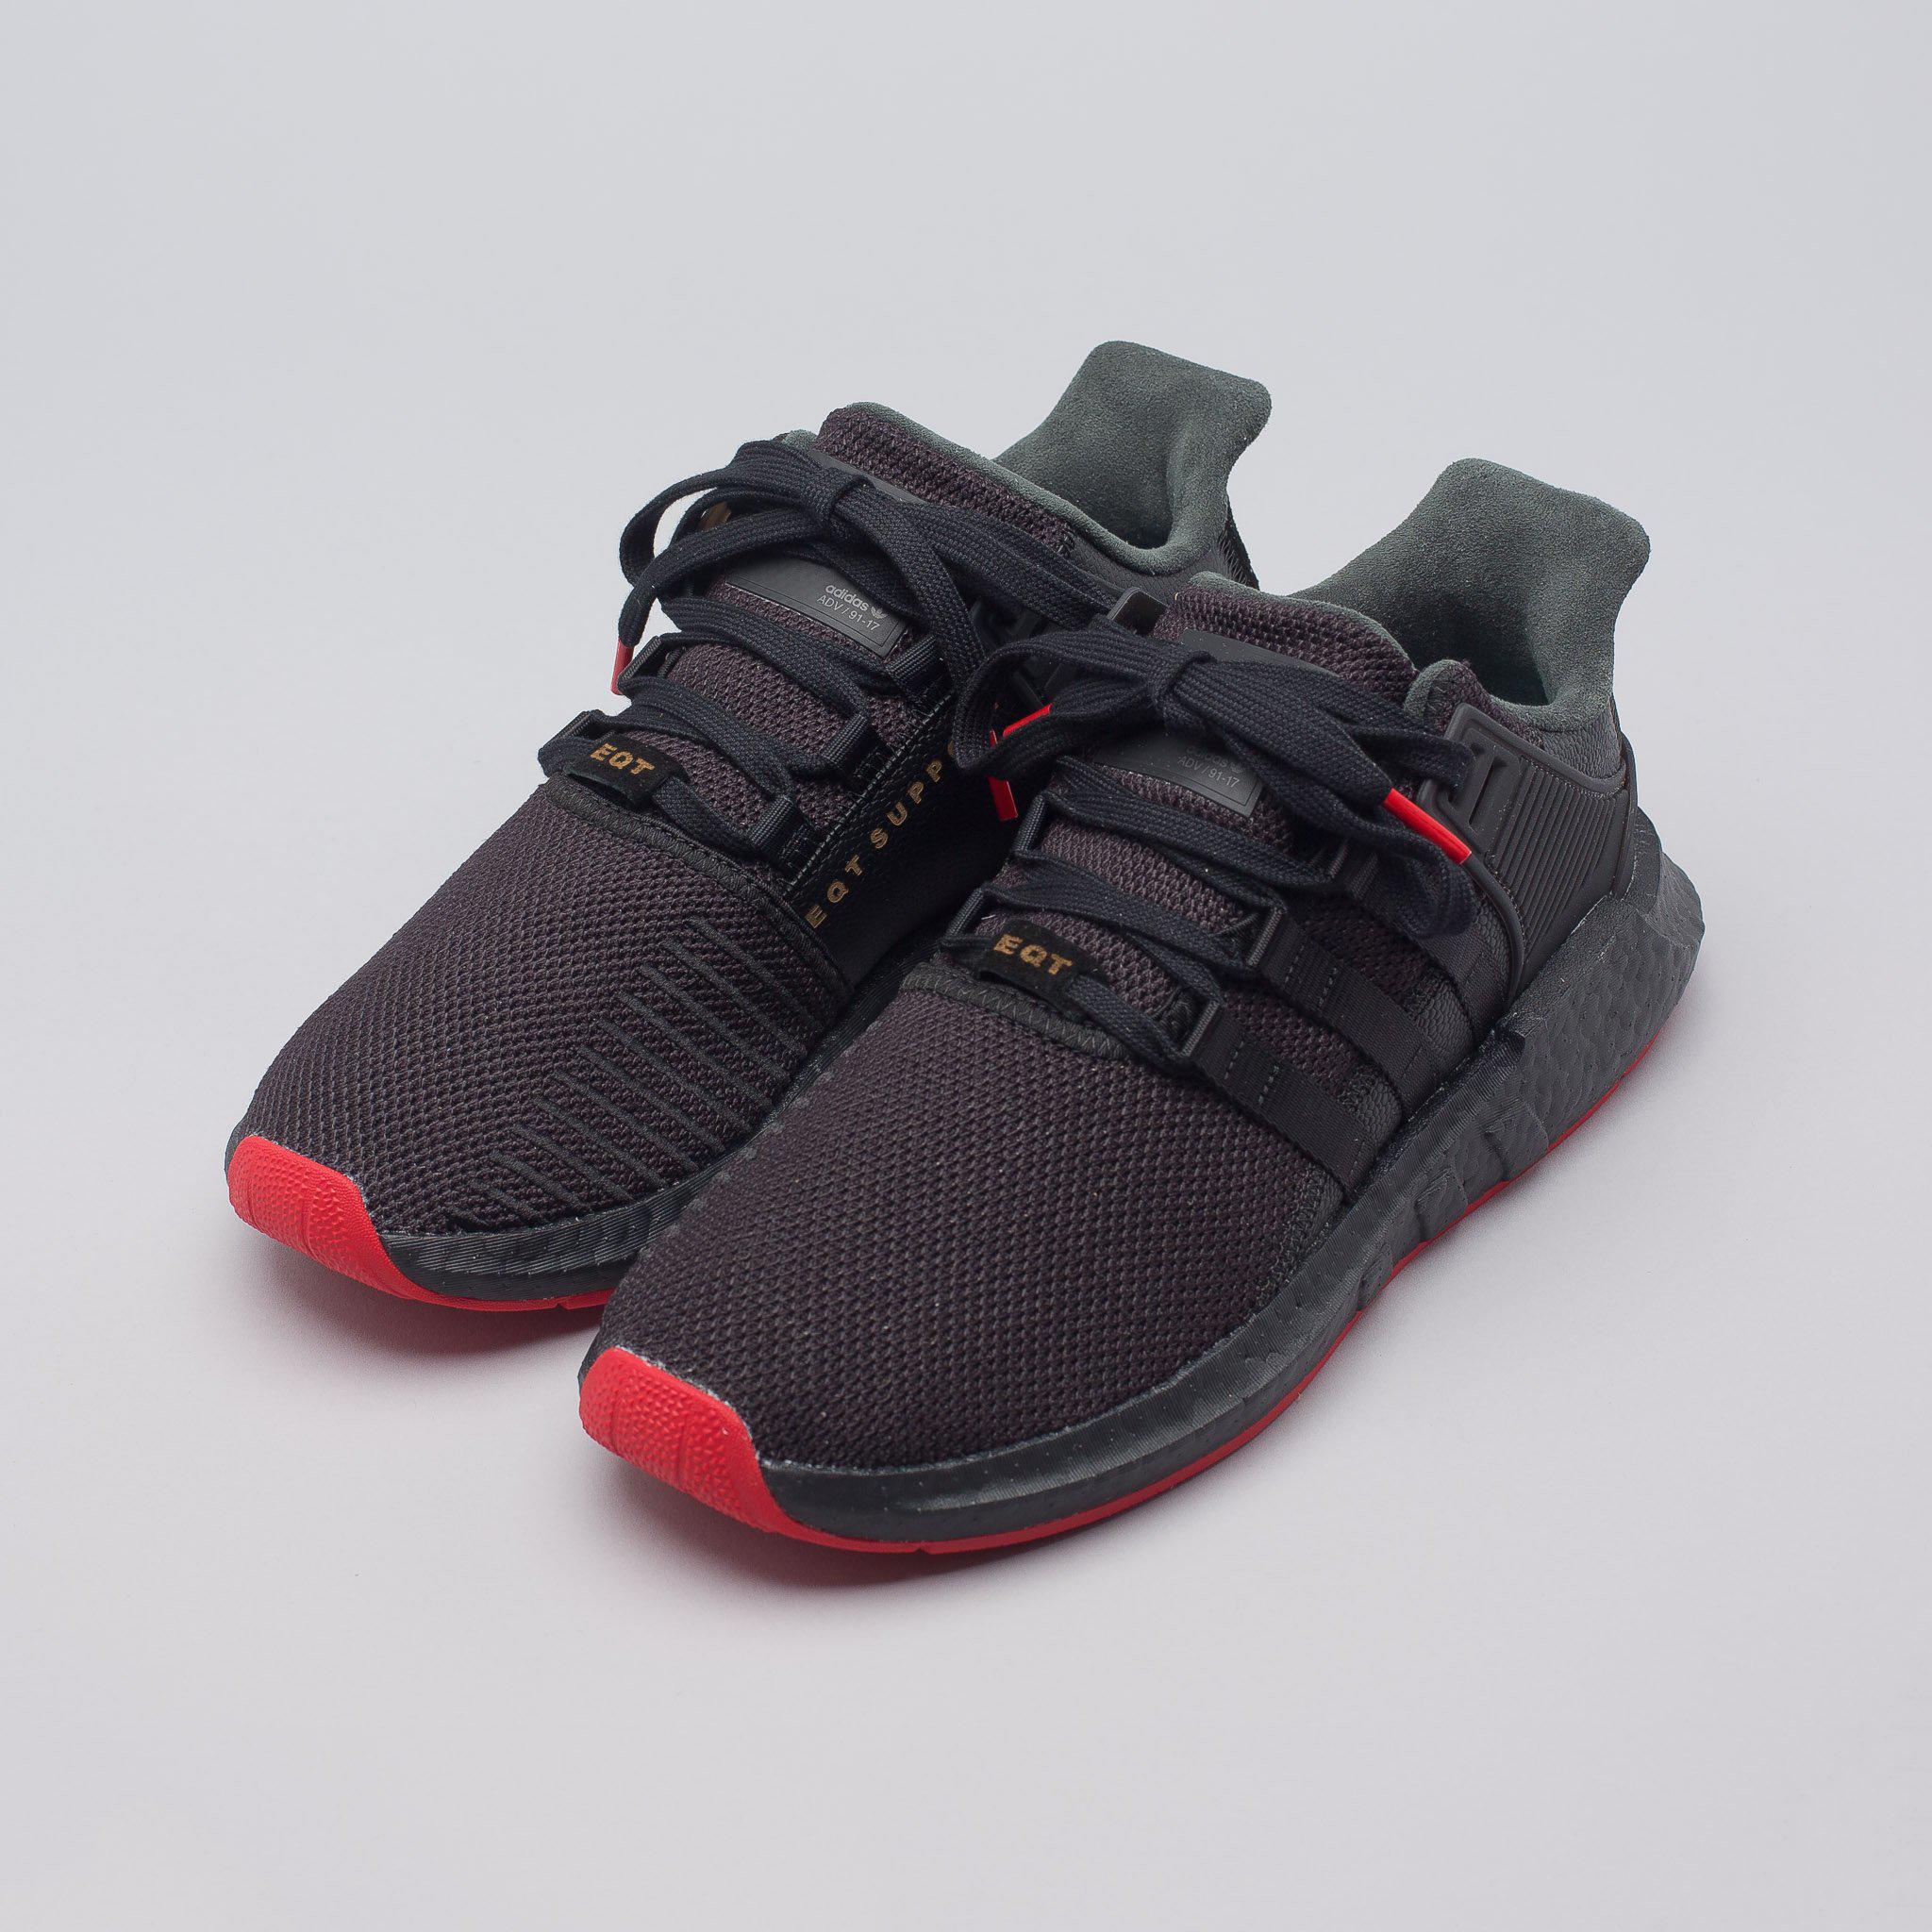 adidas Rubber Eqt Support 93/17 Red Carpet In Core Black for Men - Lyst